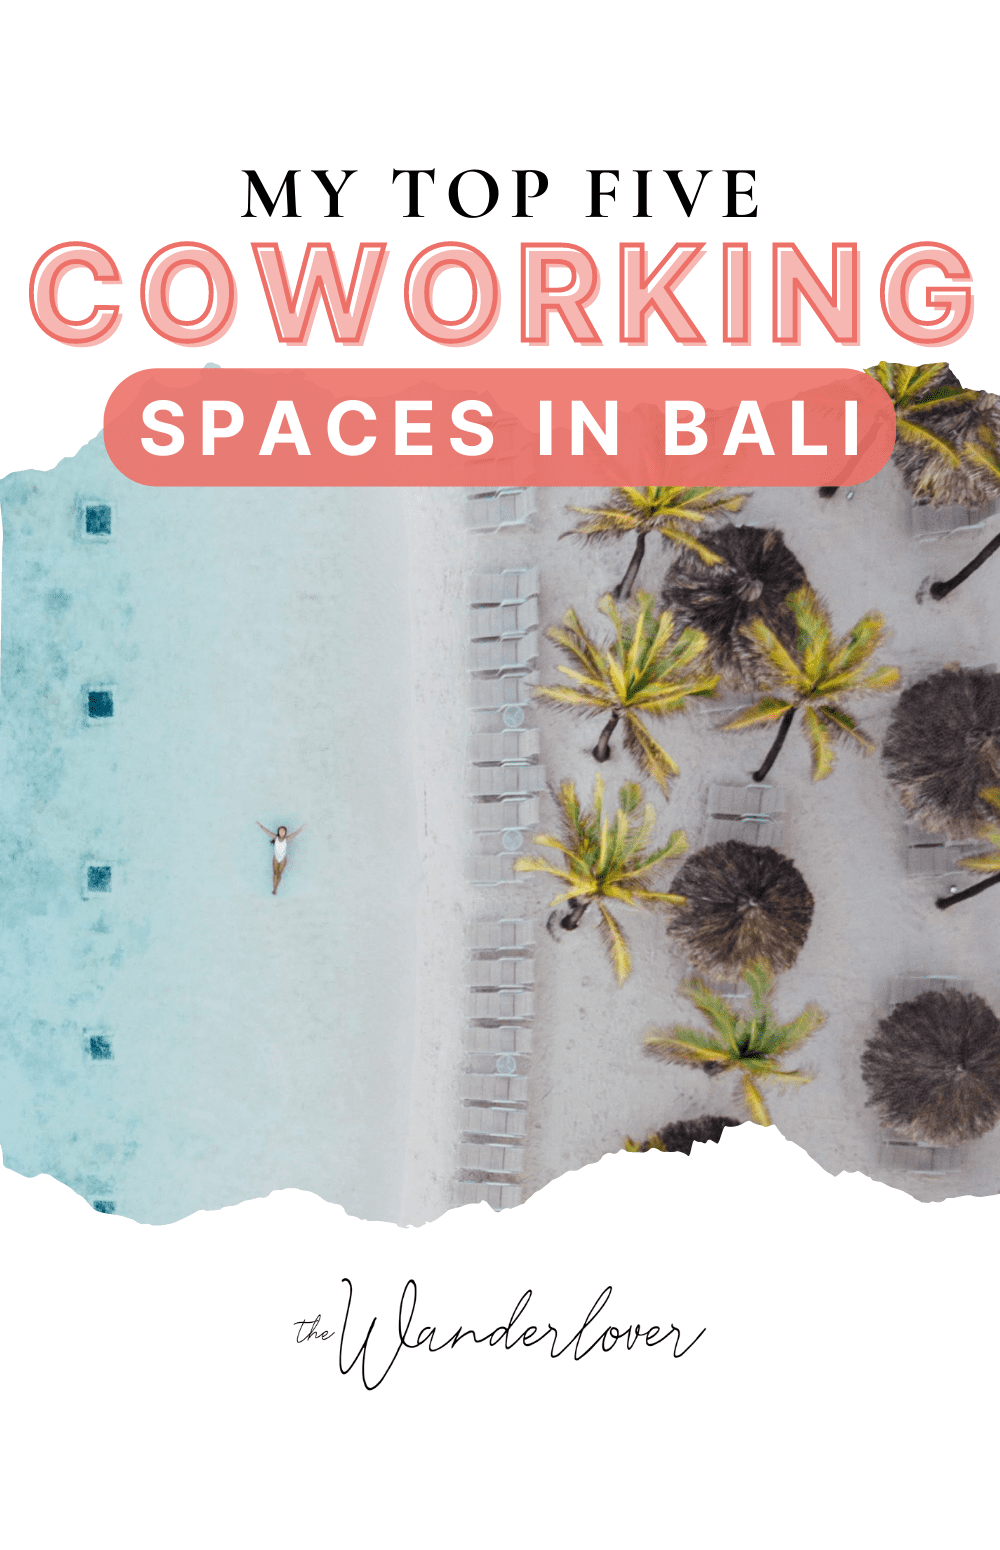 My Top 5 Coworking Spaces in Bali for Digital Nomads